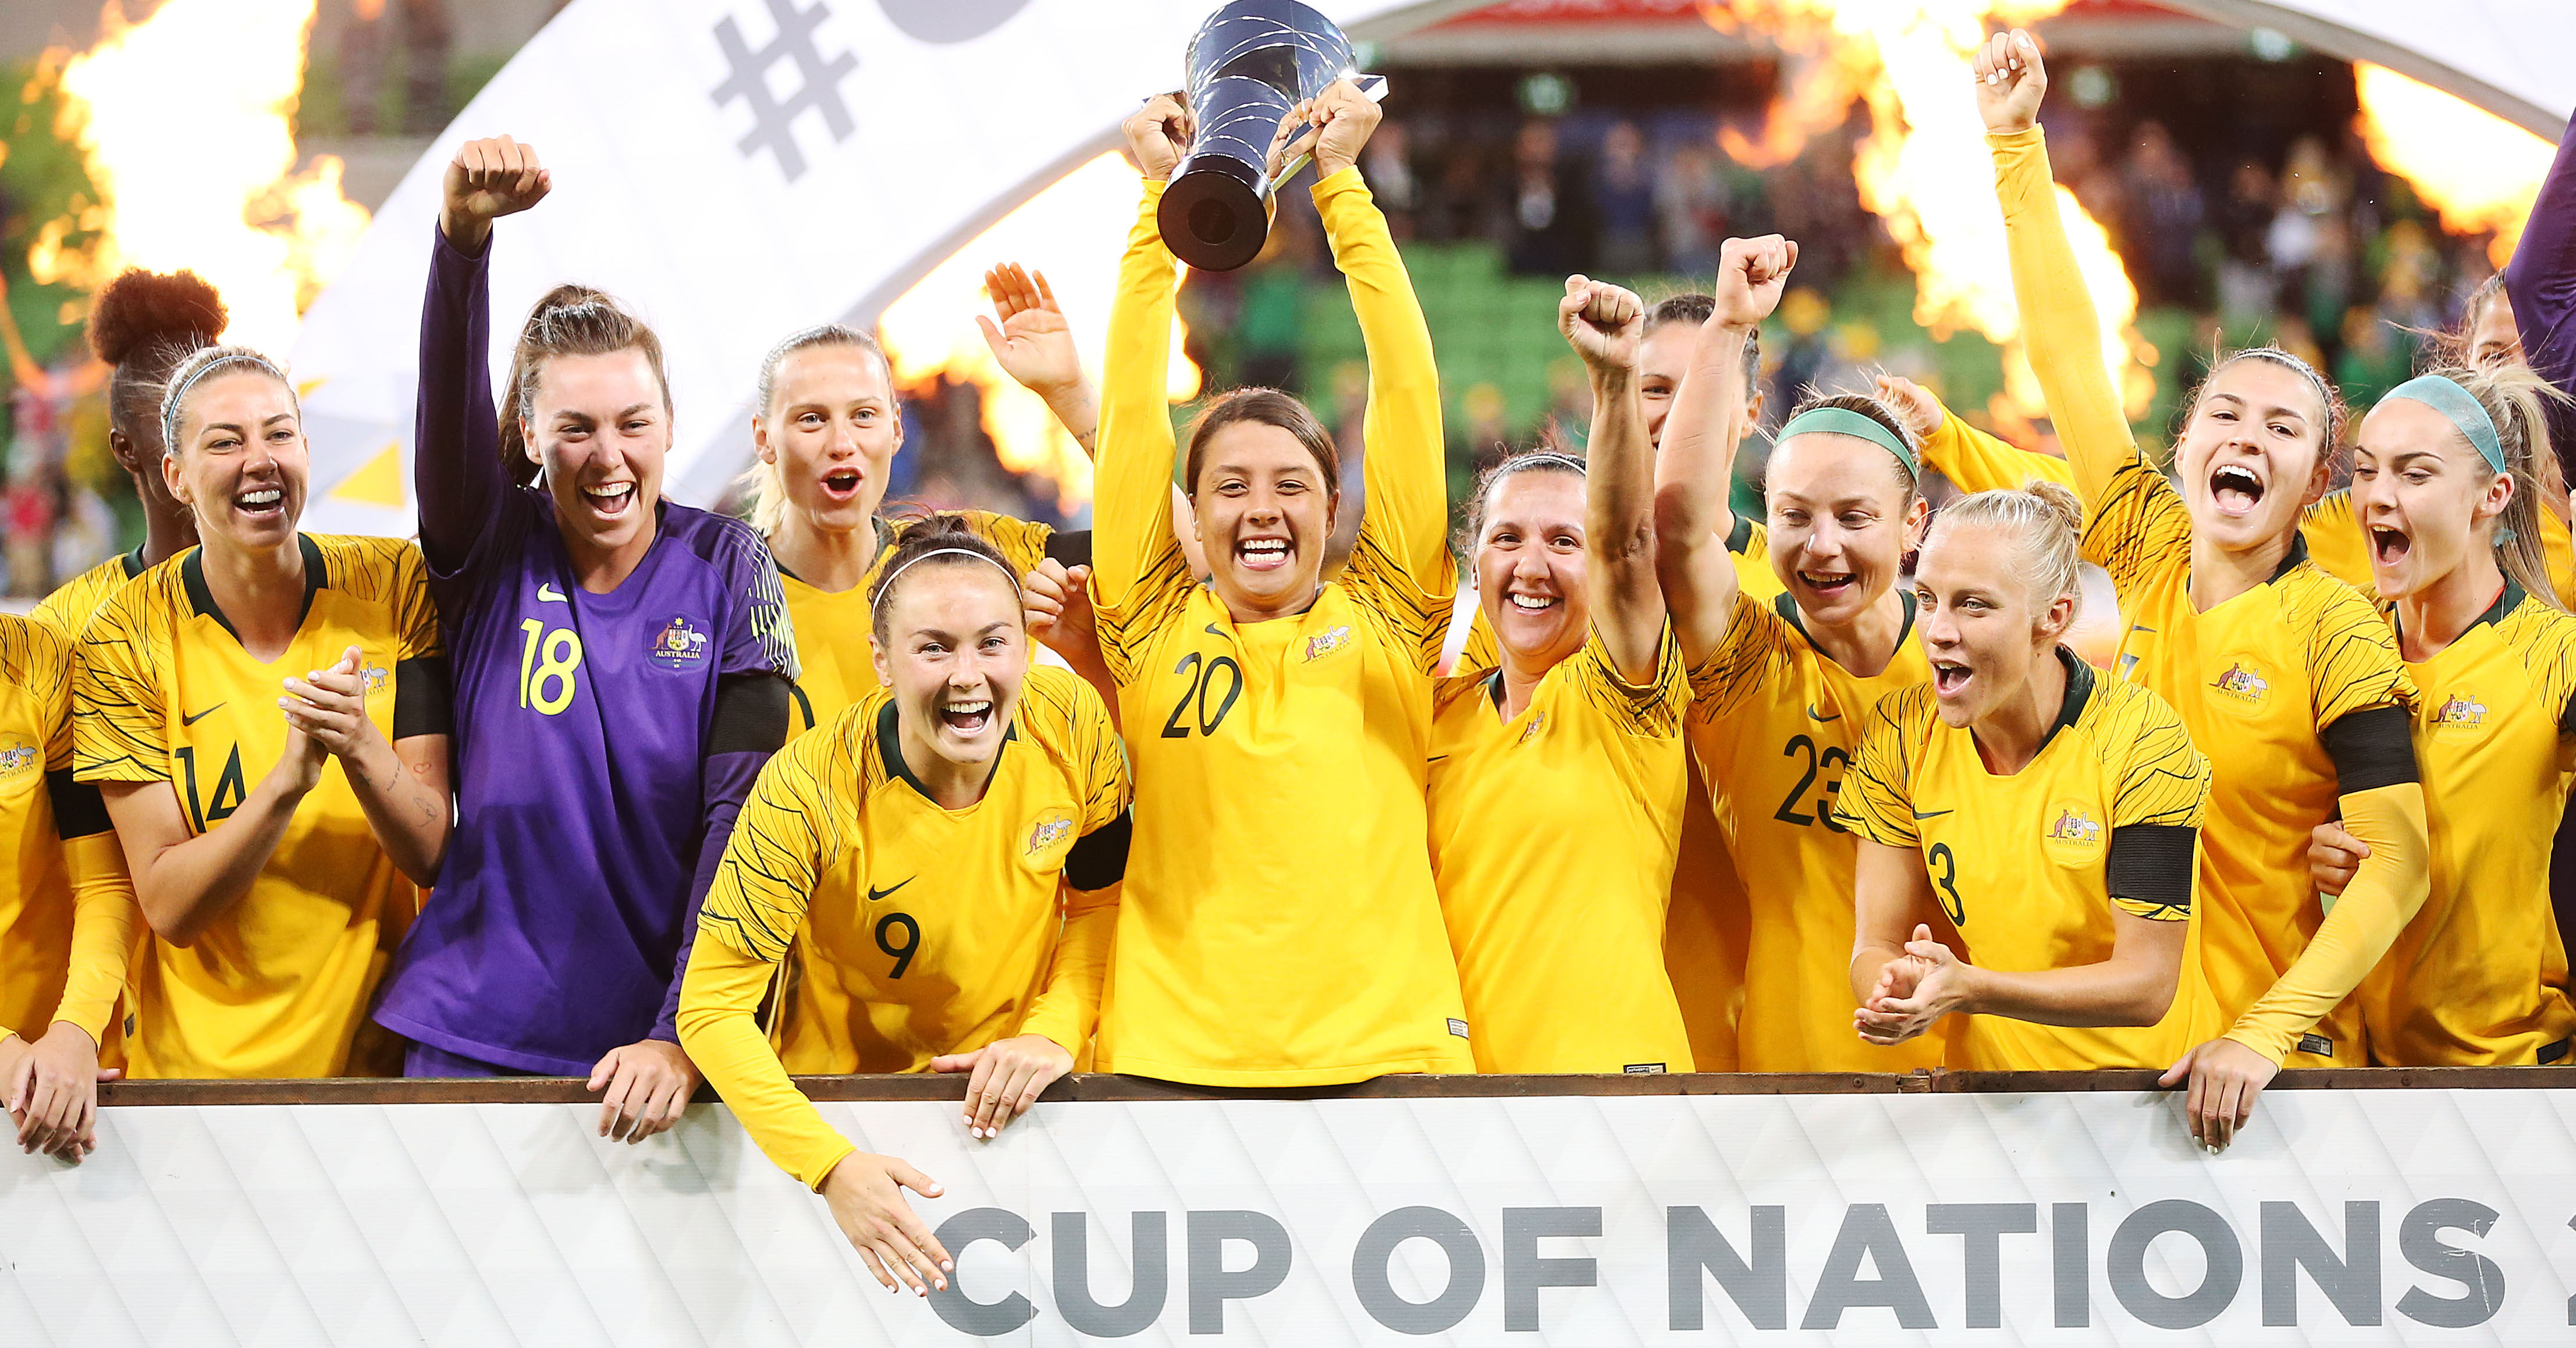 Matildas win the Cup of Nations in melbourne